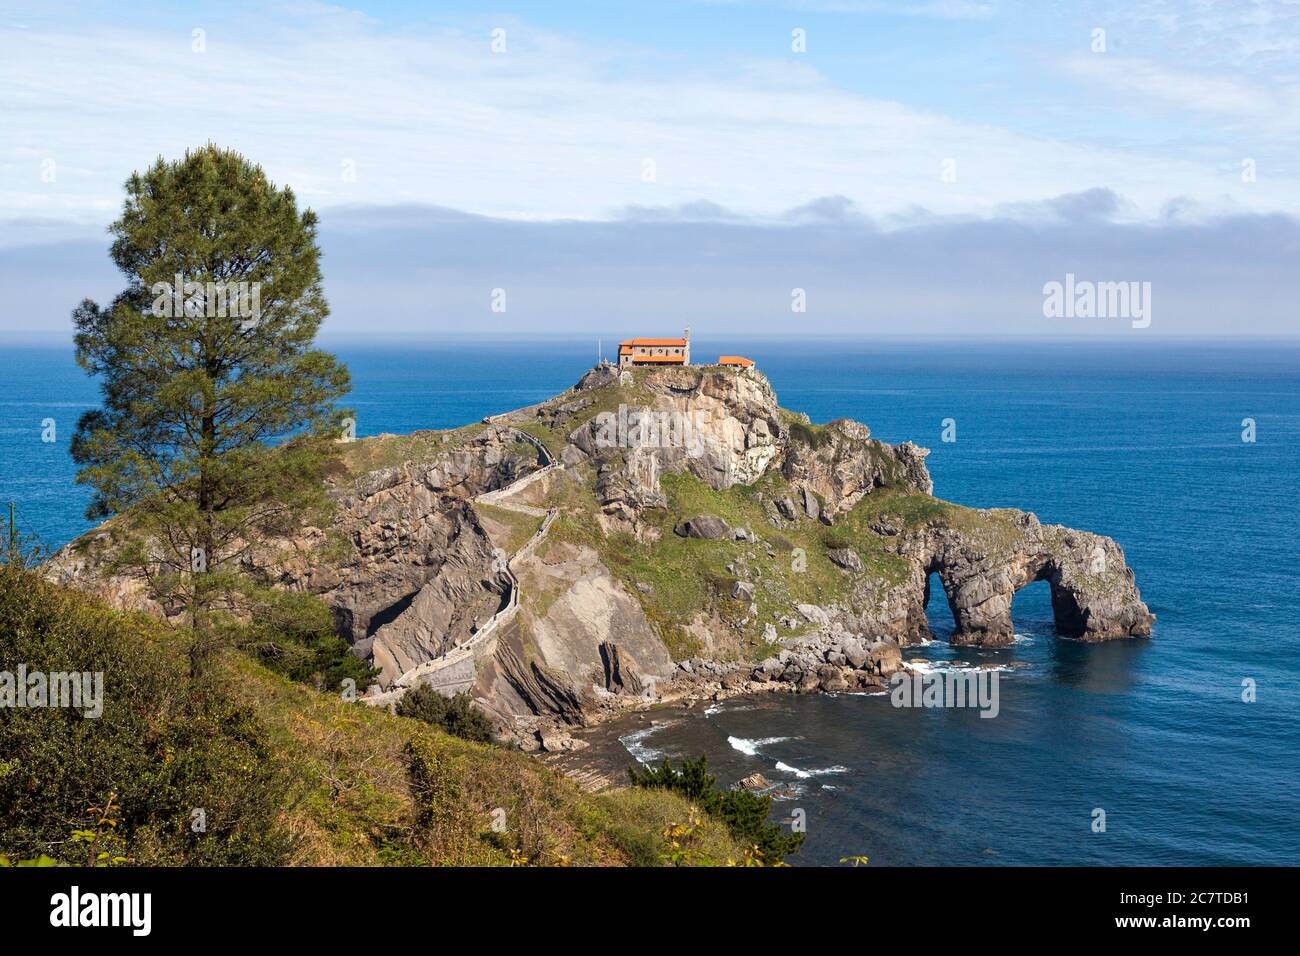 San Juan de Gaztelugatxe, Basque Country, Spain. It is an islet on the coast of Biscay, connected to the mainland by a man-made bridge. On top of the Stock Photo